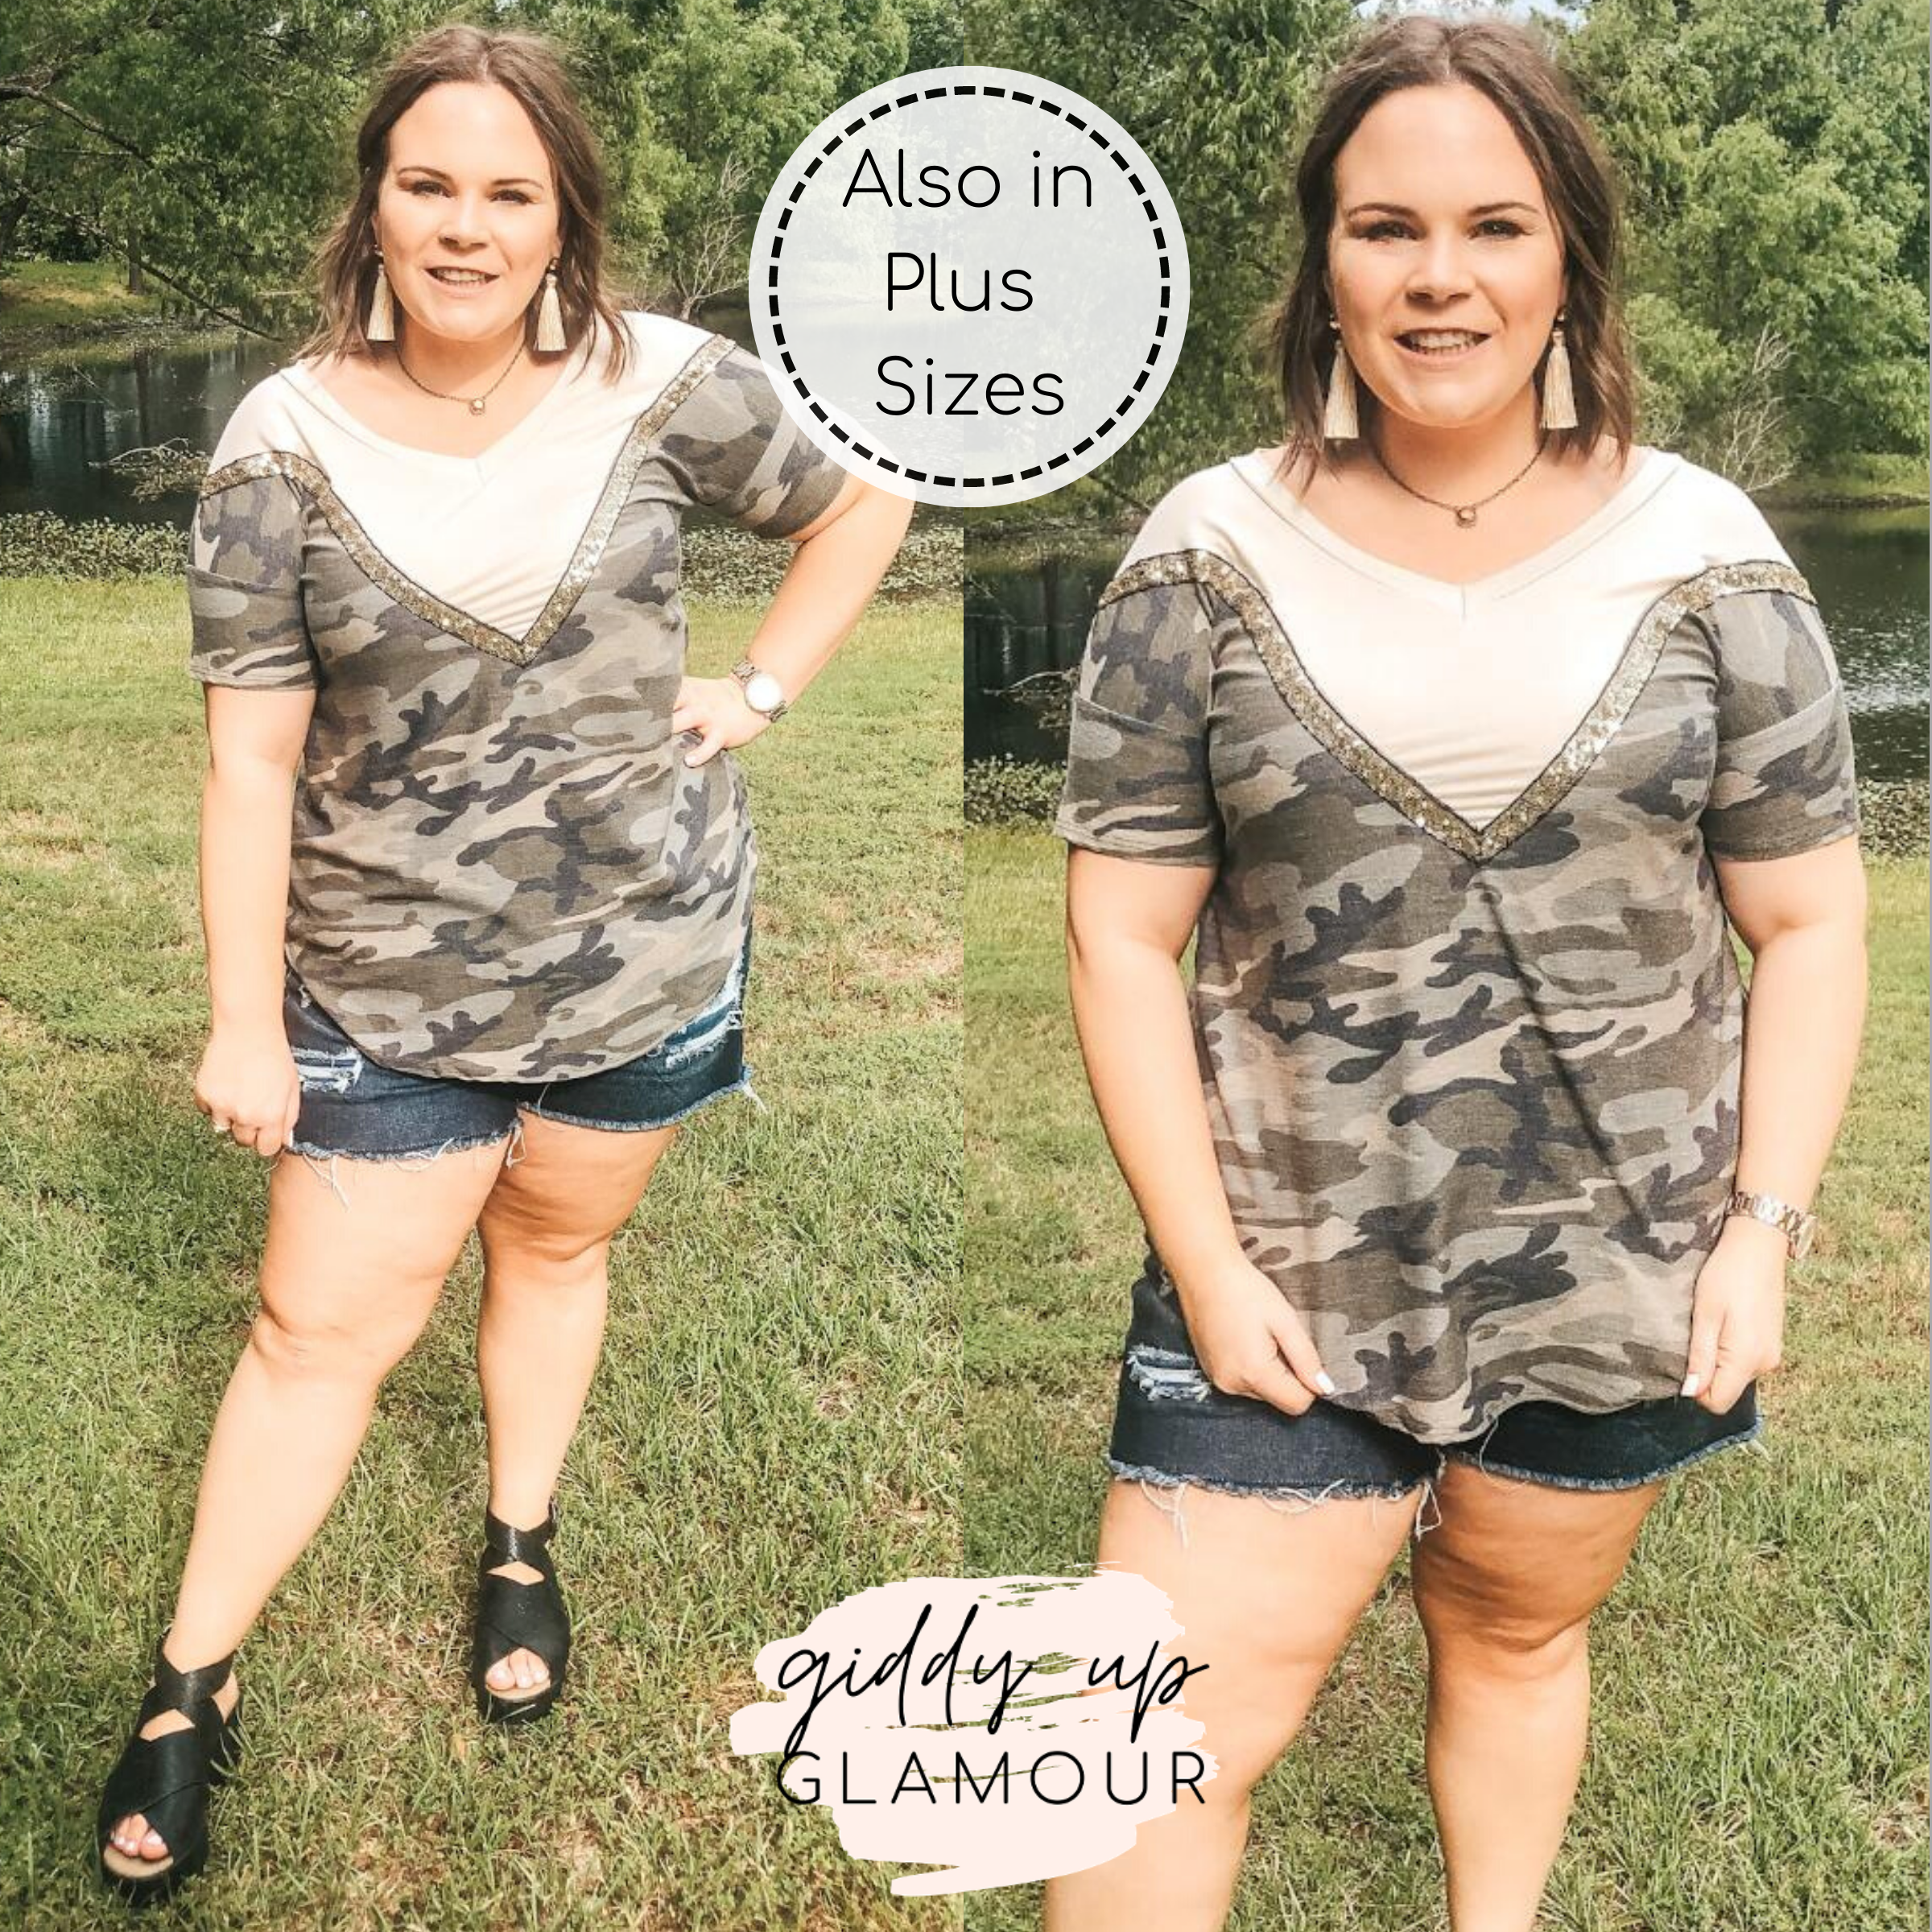 Keeping The Vibe V Neck Tee with Sequin Detailing in Camouflage and Ivory - Giddy Up Glamour Boutique